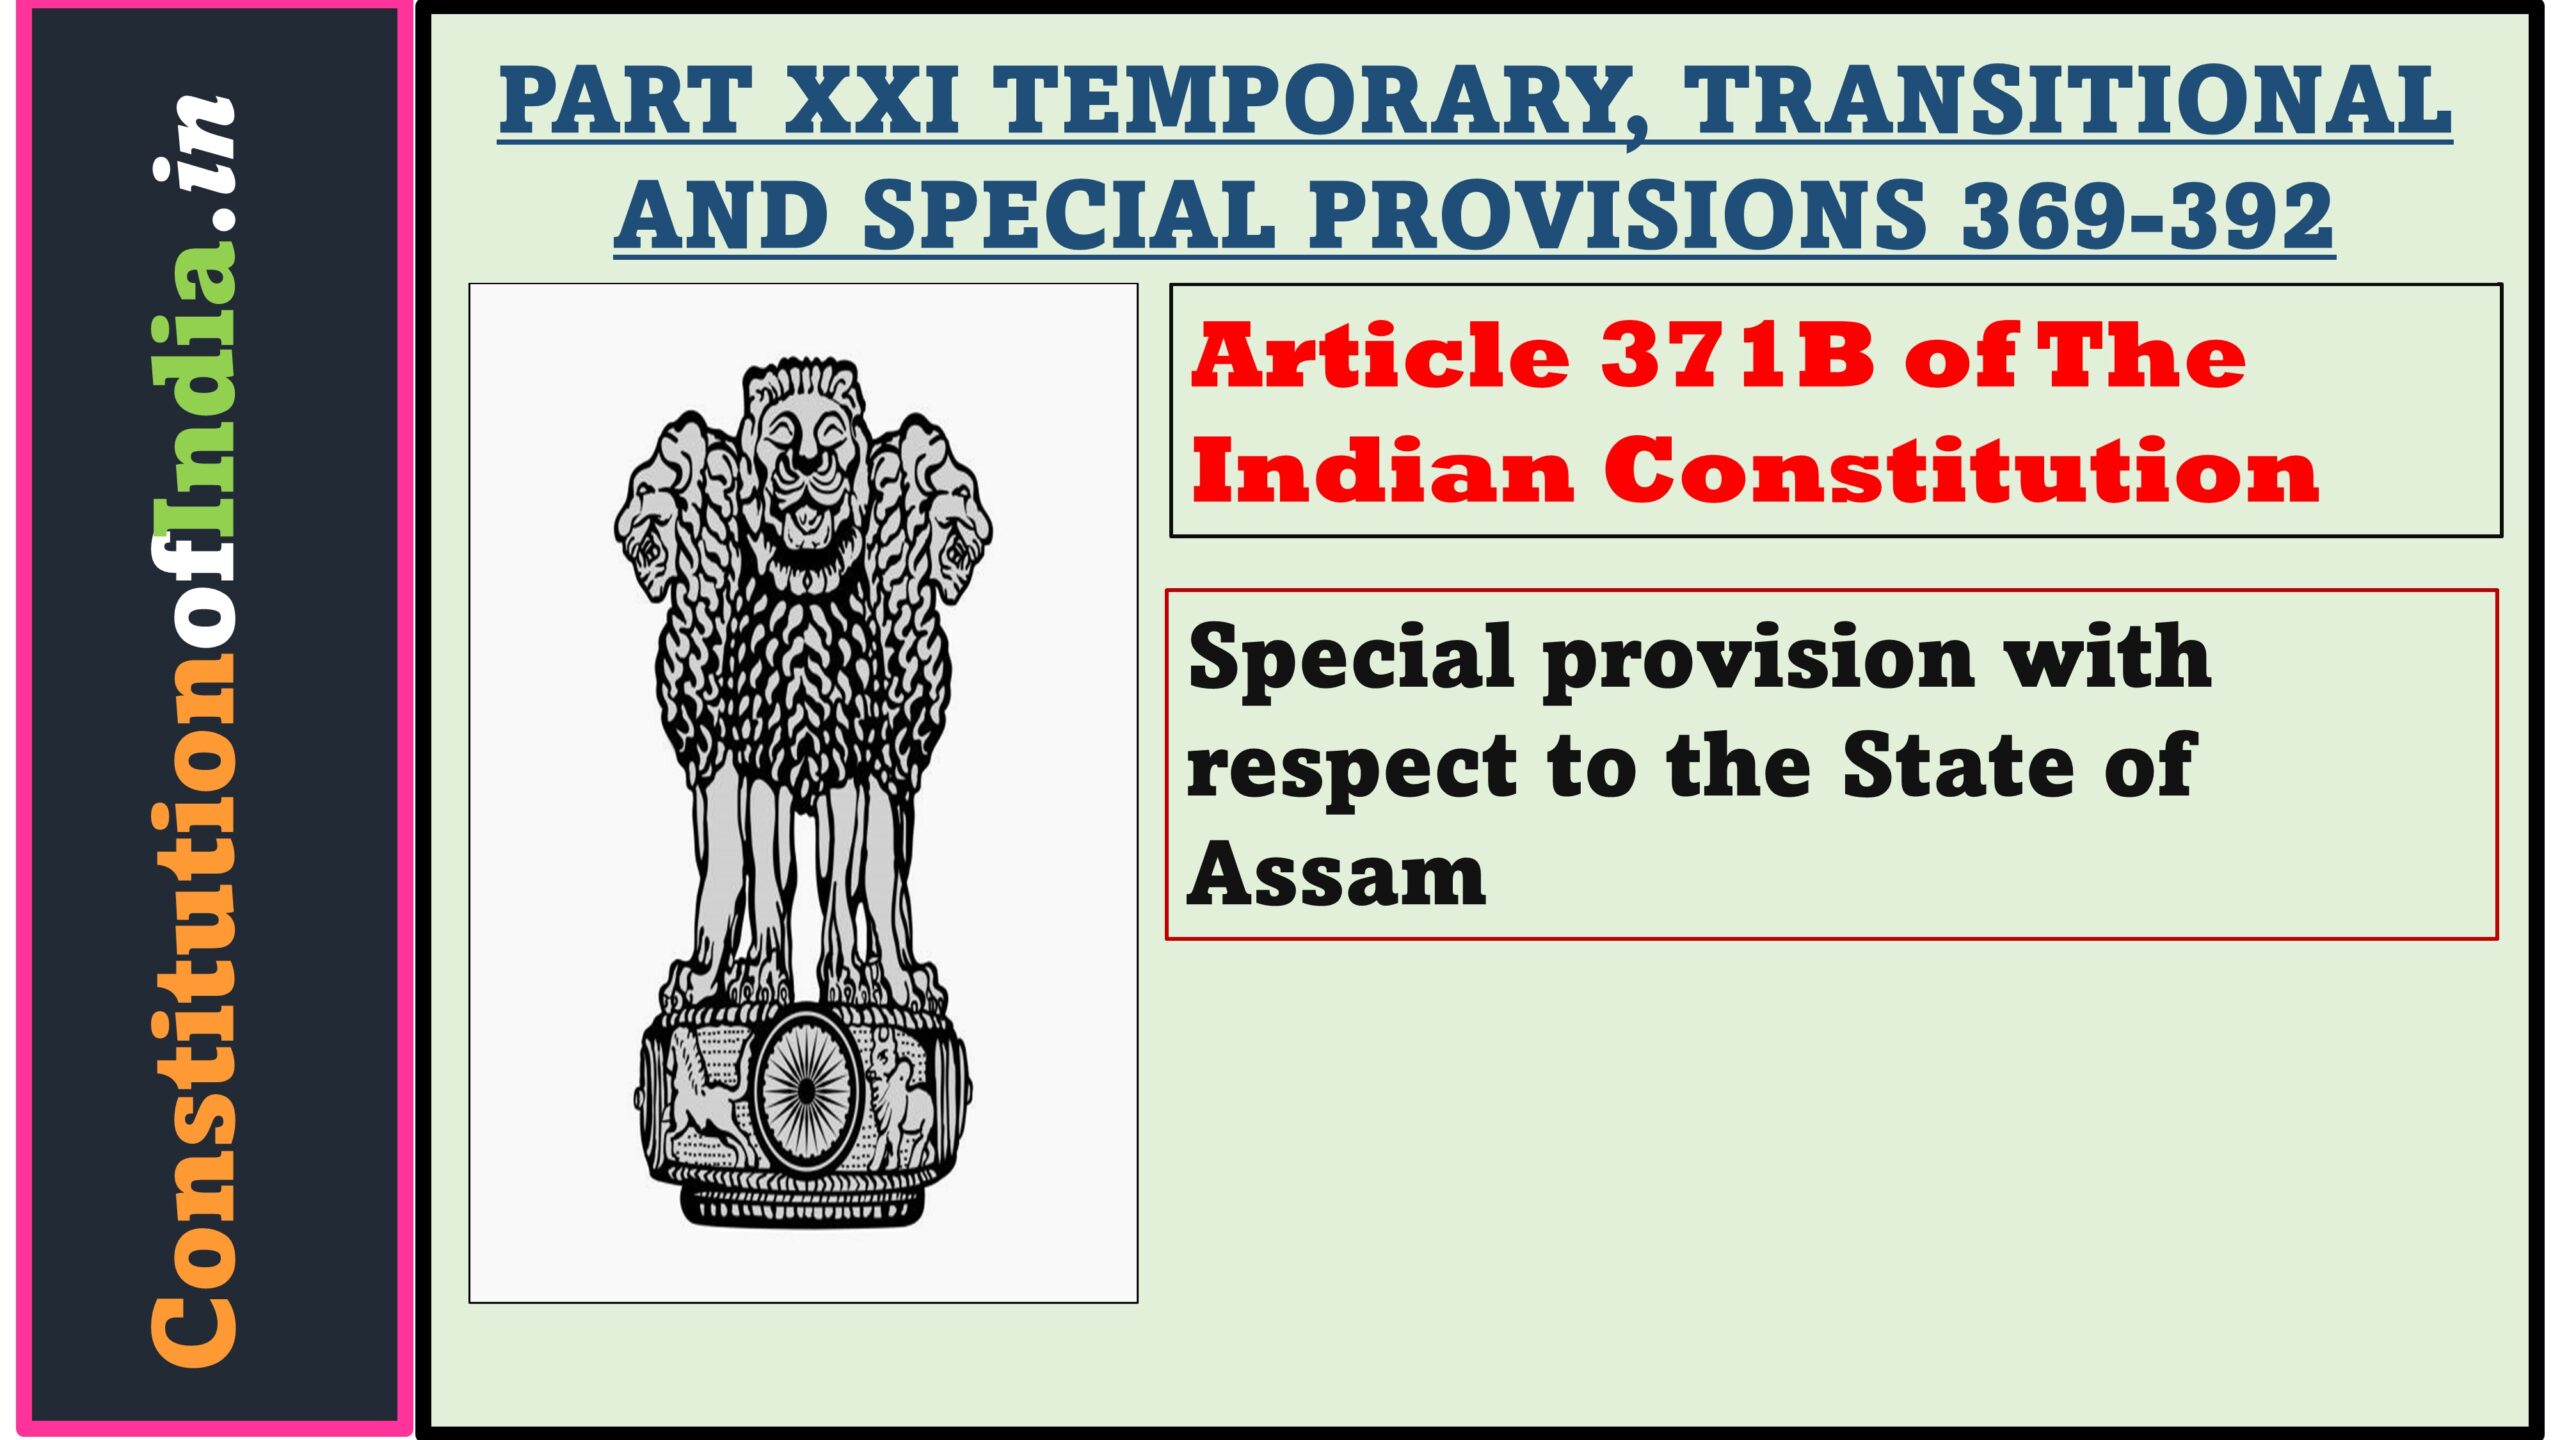 Article 371B of The Indian Constitution